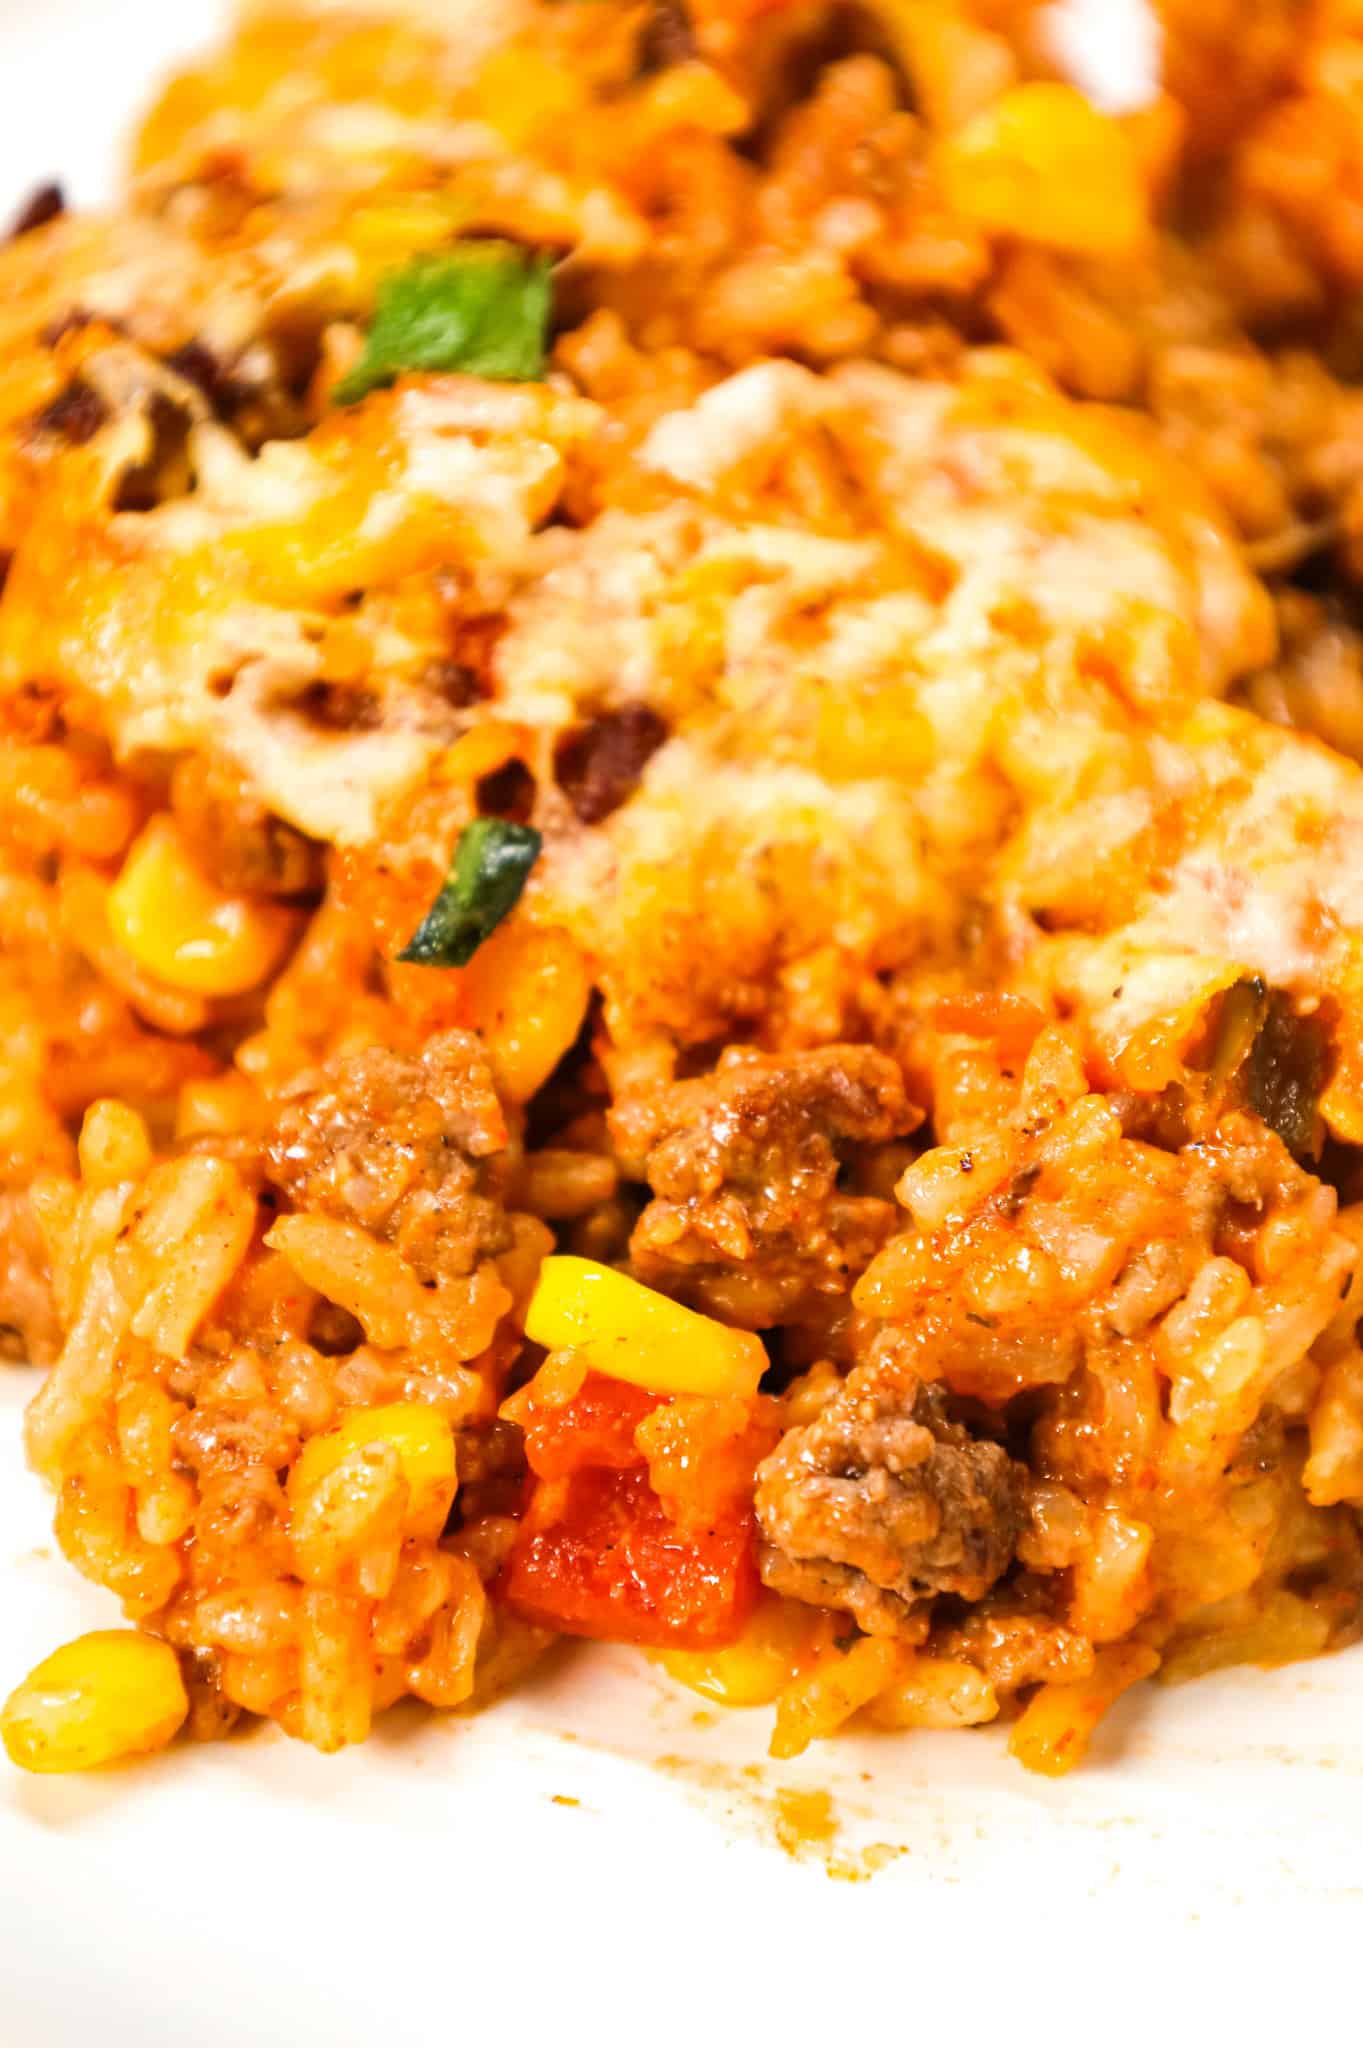 Taco Rice Casserole is a hearty ground beef casserole loaded with instant rice, condensed cheddar soup, corn, salsa, taco seasoning, ranch dressing mix, chopped green onions and a shredded Mexican cheese blend.